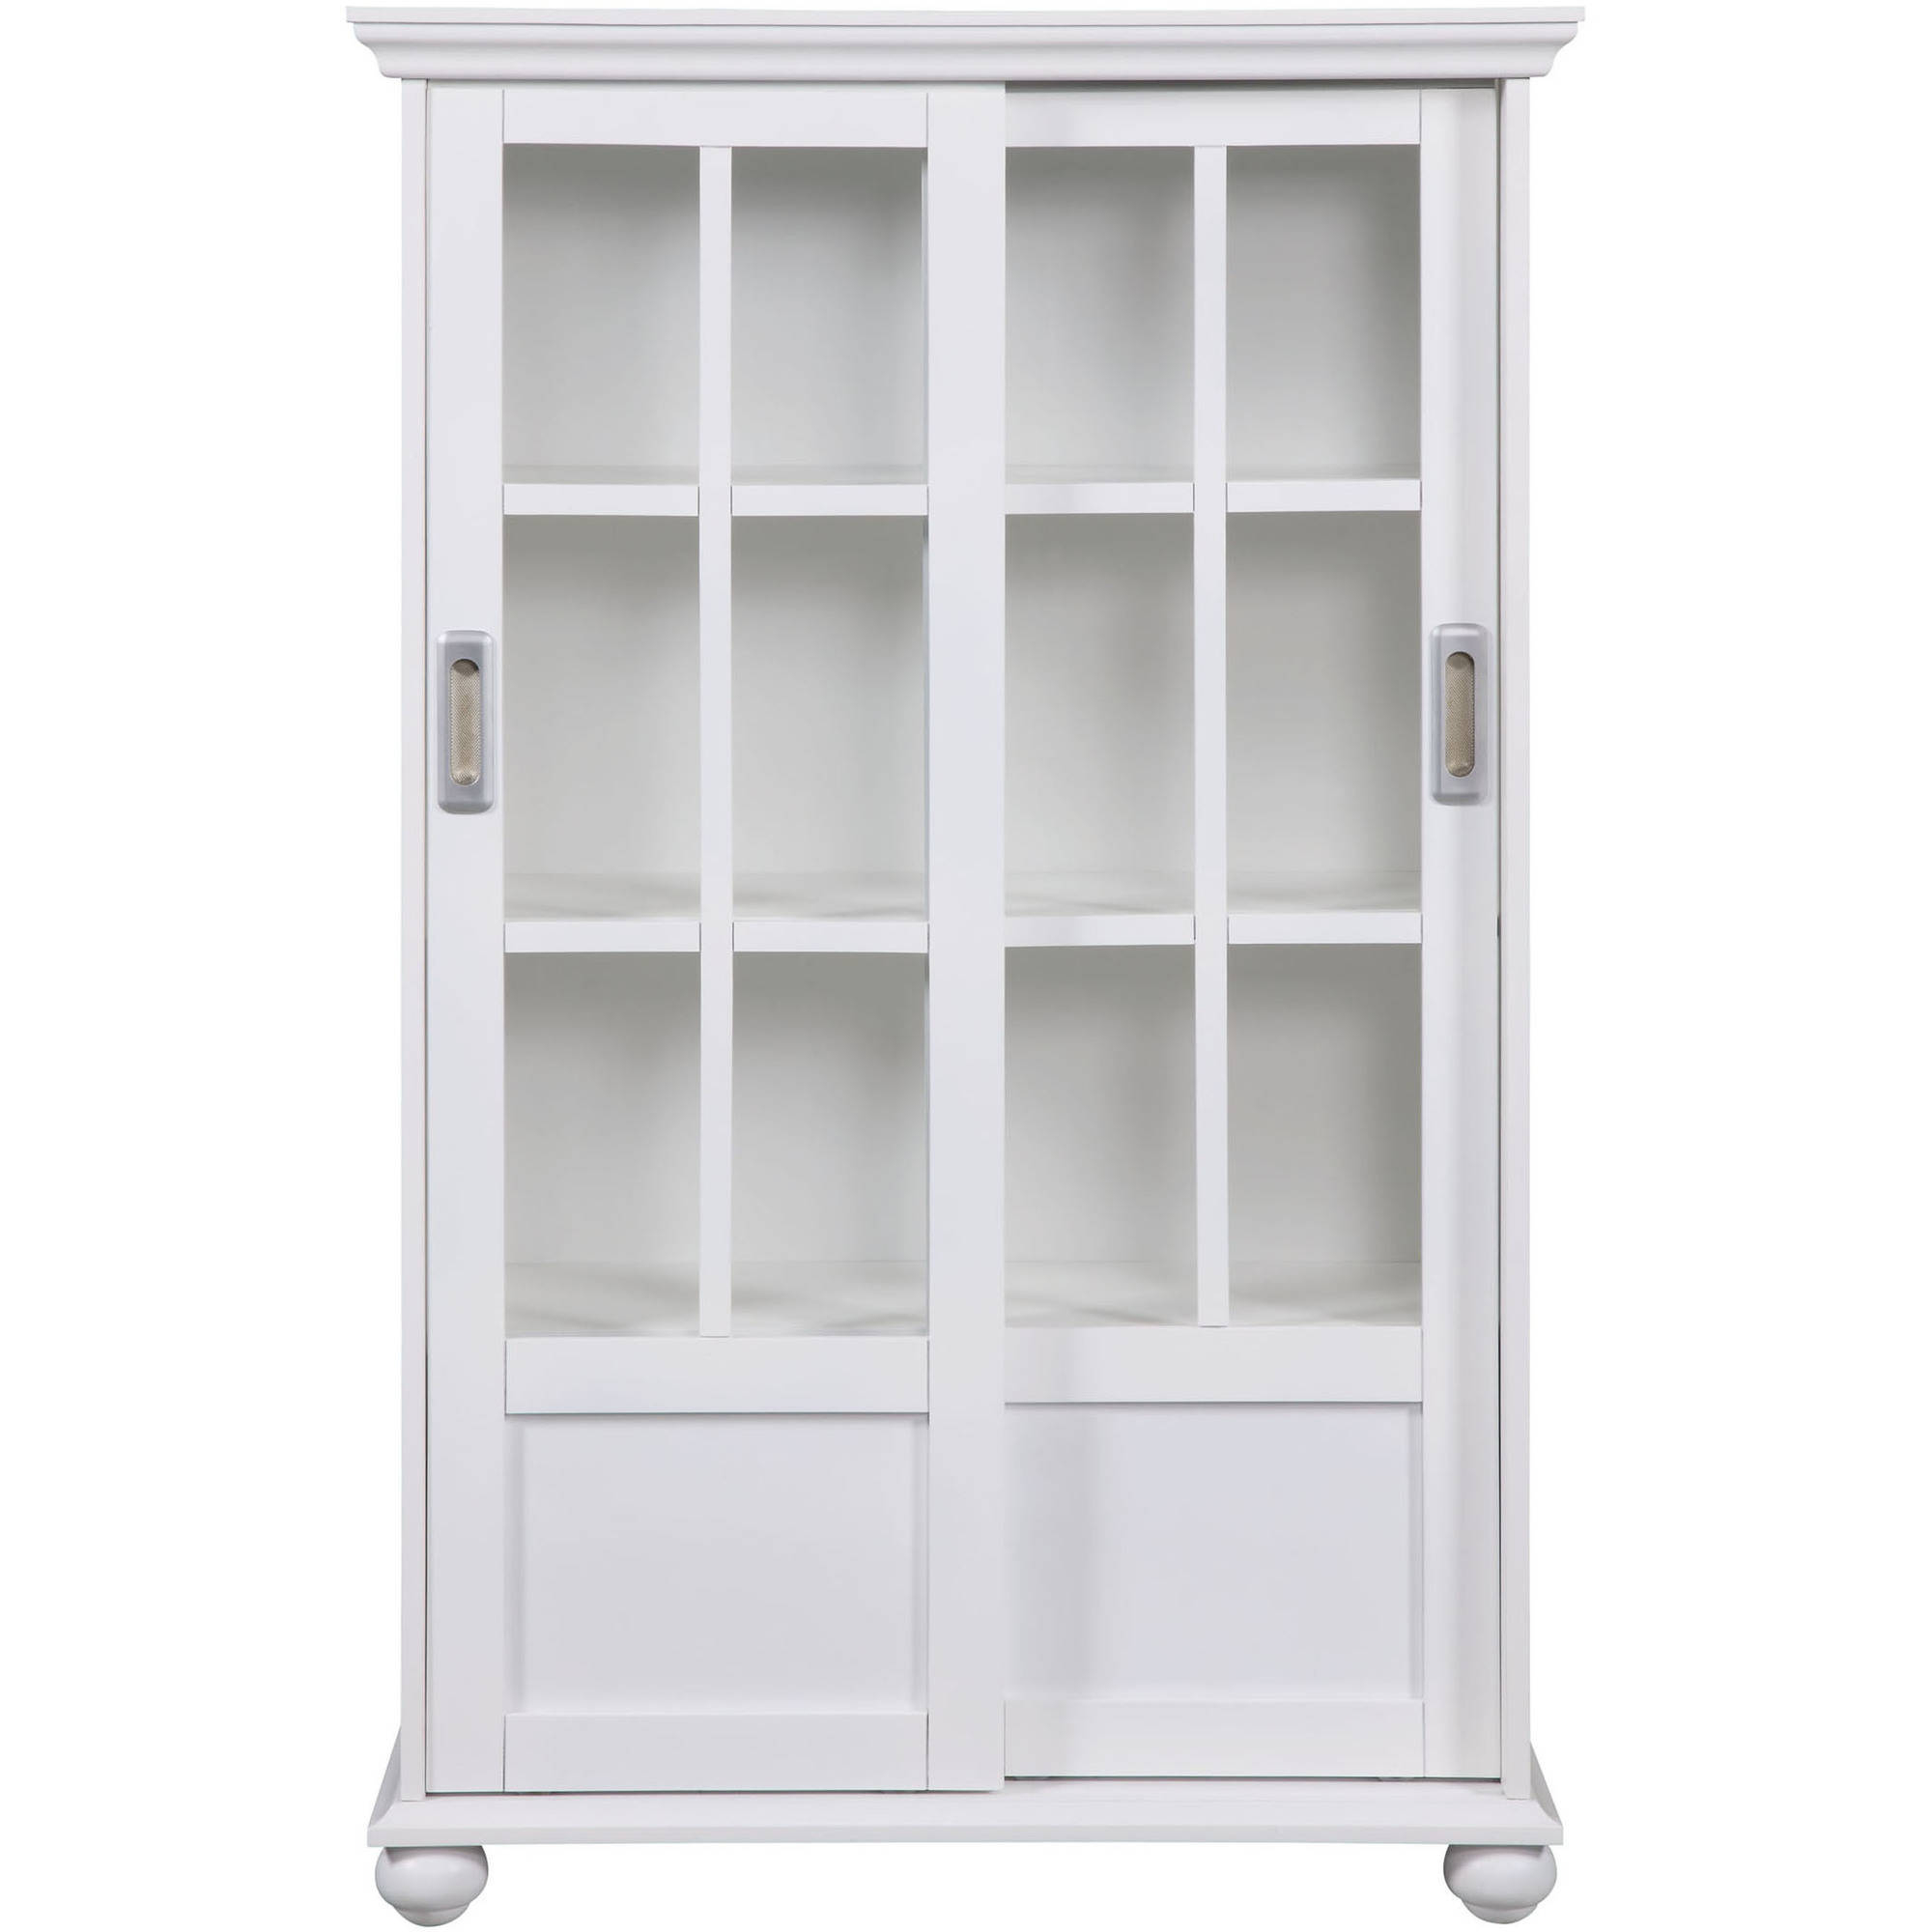 Bookcase With Glass Doors Visualhunt, Office Bookcase With Glass Doors